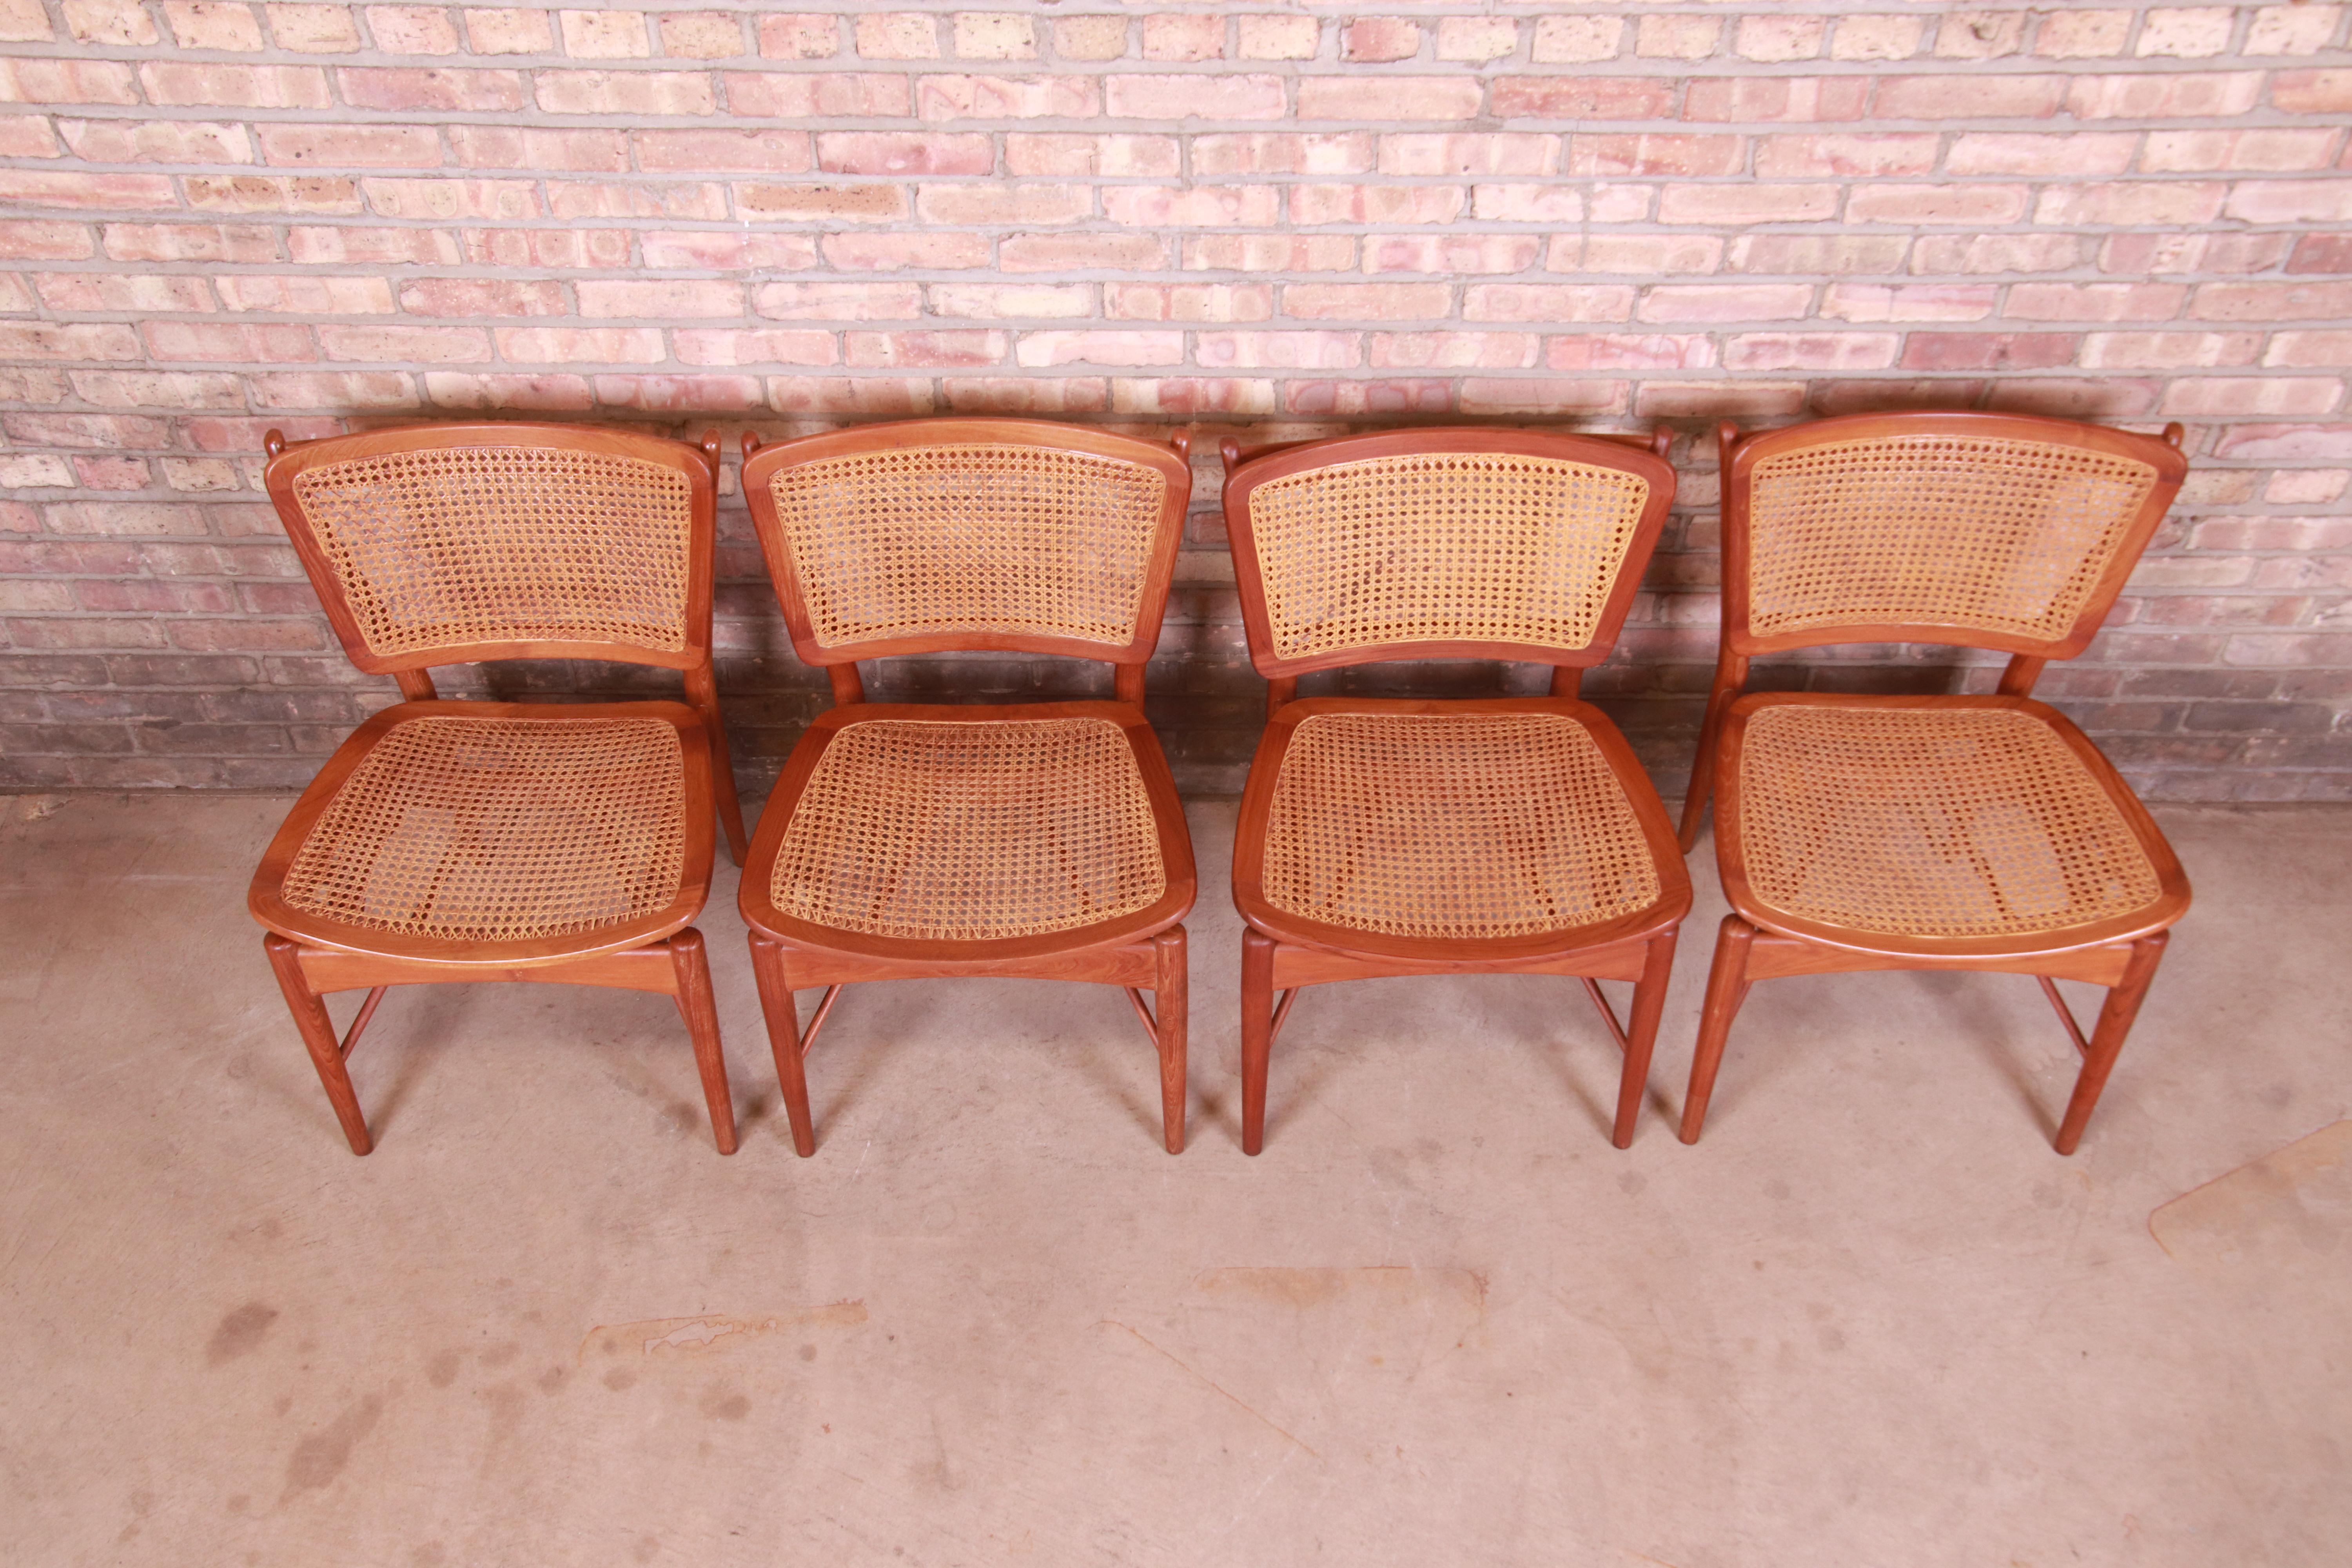 Mid-20th Century Finn Juhl for Baker Furniture Teak and Cane Dining Chairs, Set of Four